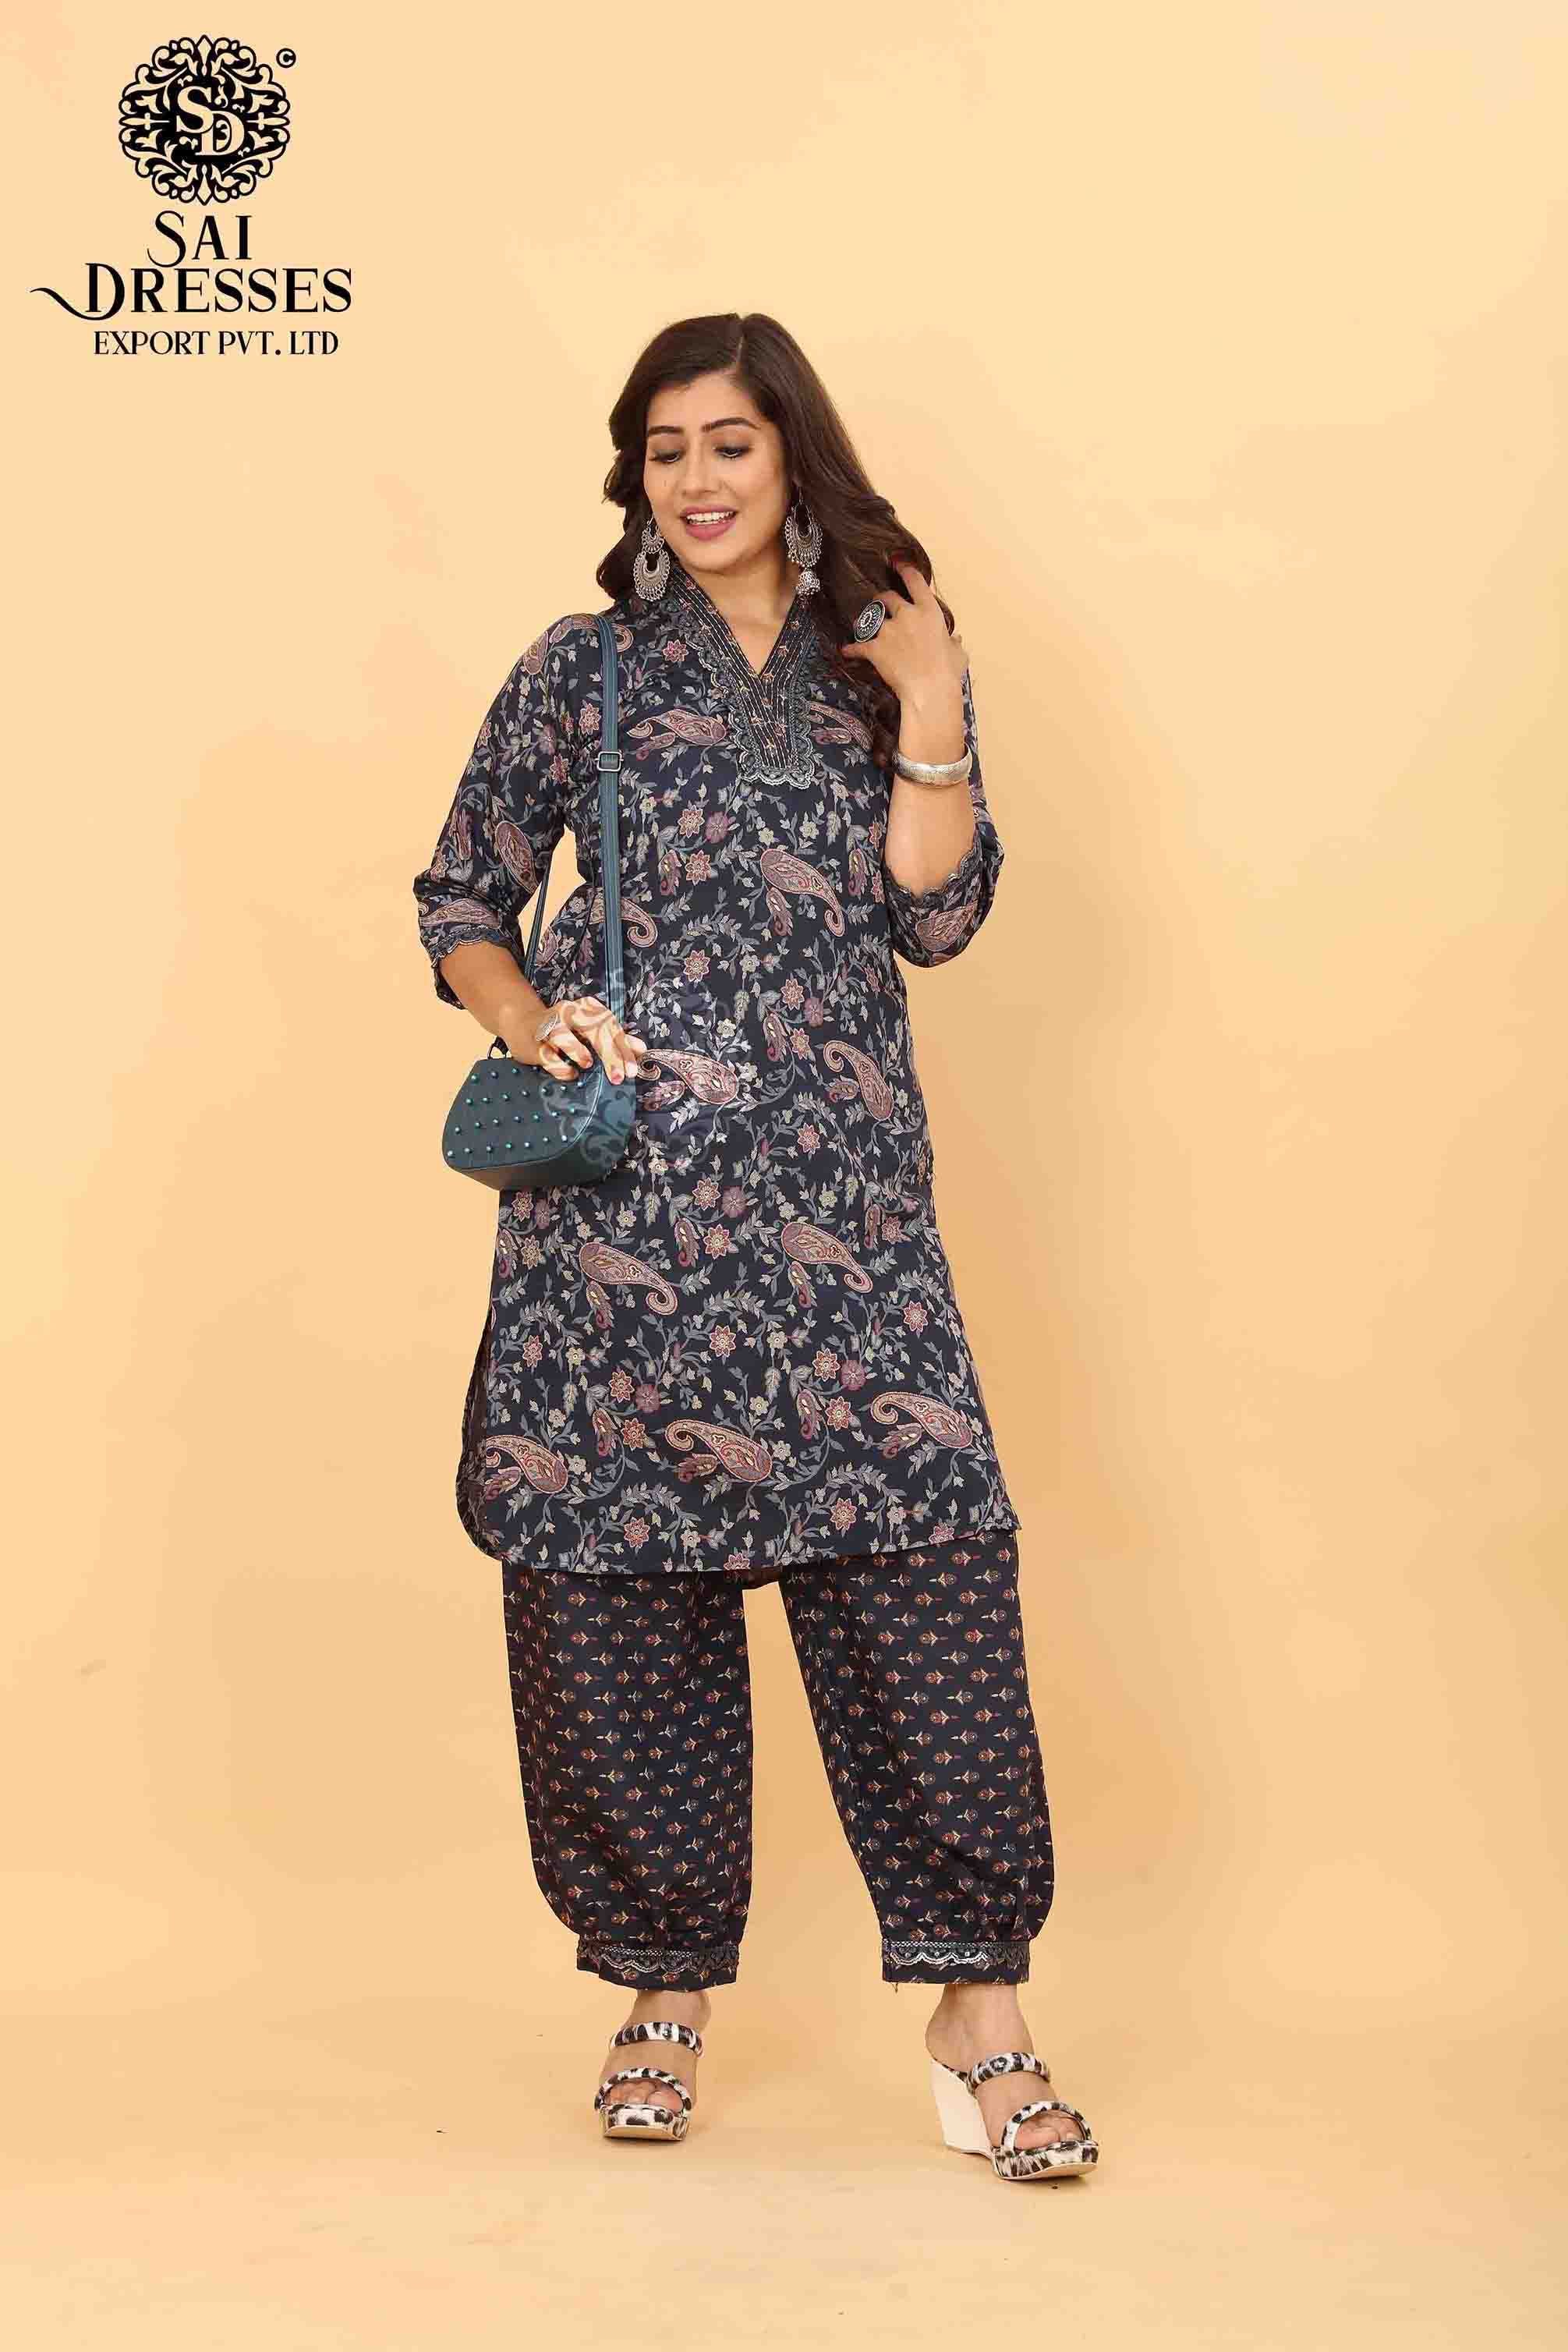 SAI DRESSES PRESENT D.NO SD 5015 READY TO EXCLUSIVE TRENDY WEAR PATHANI KURTA WITH AFGHANI PANT STYLE COMBO COLLECTION IN WHOLESALE RATE IN SURAT